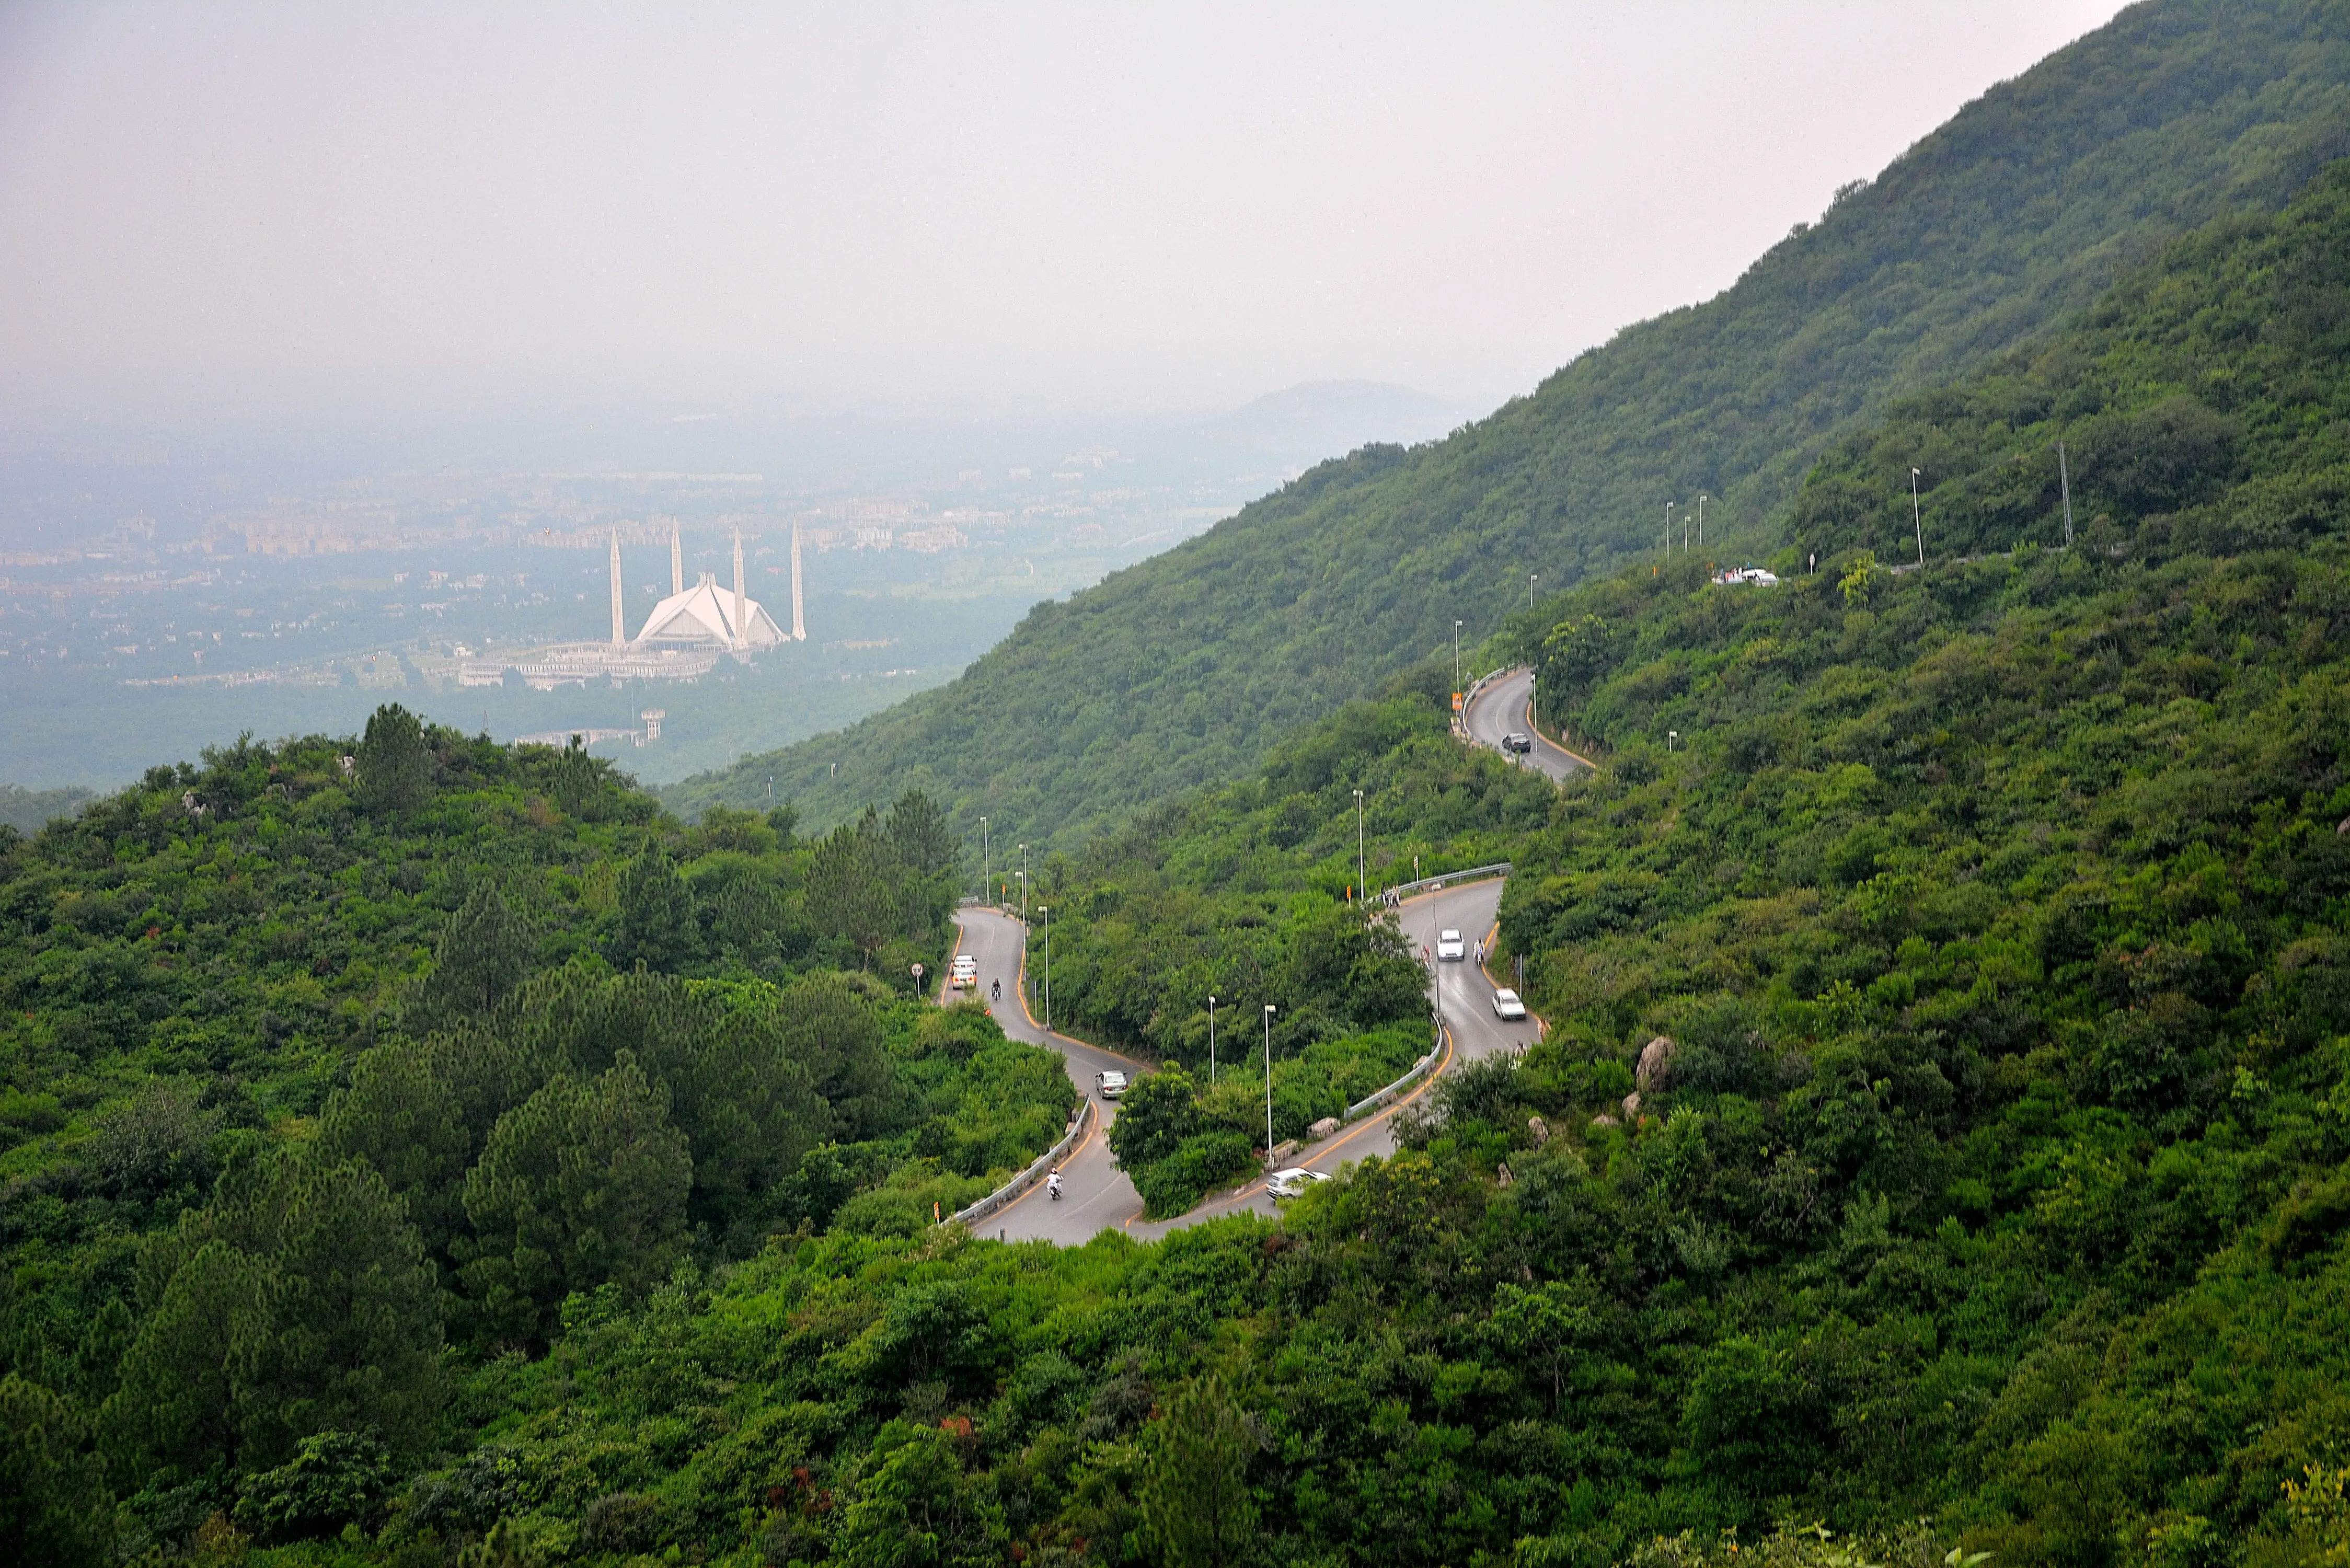 The Duke and Duchess of Cambridgde visited Margalla Hills in Pakistan